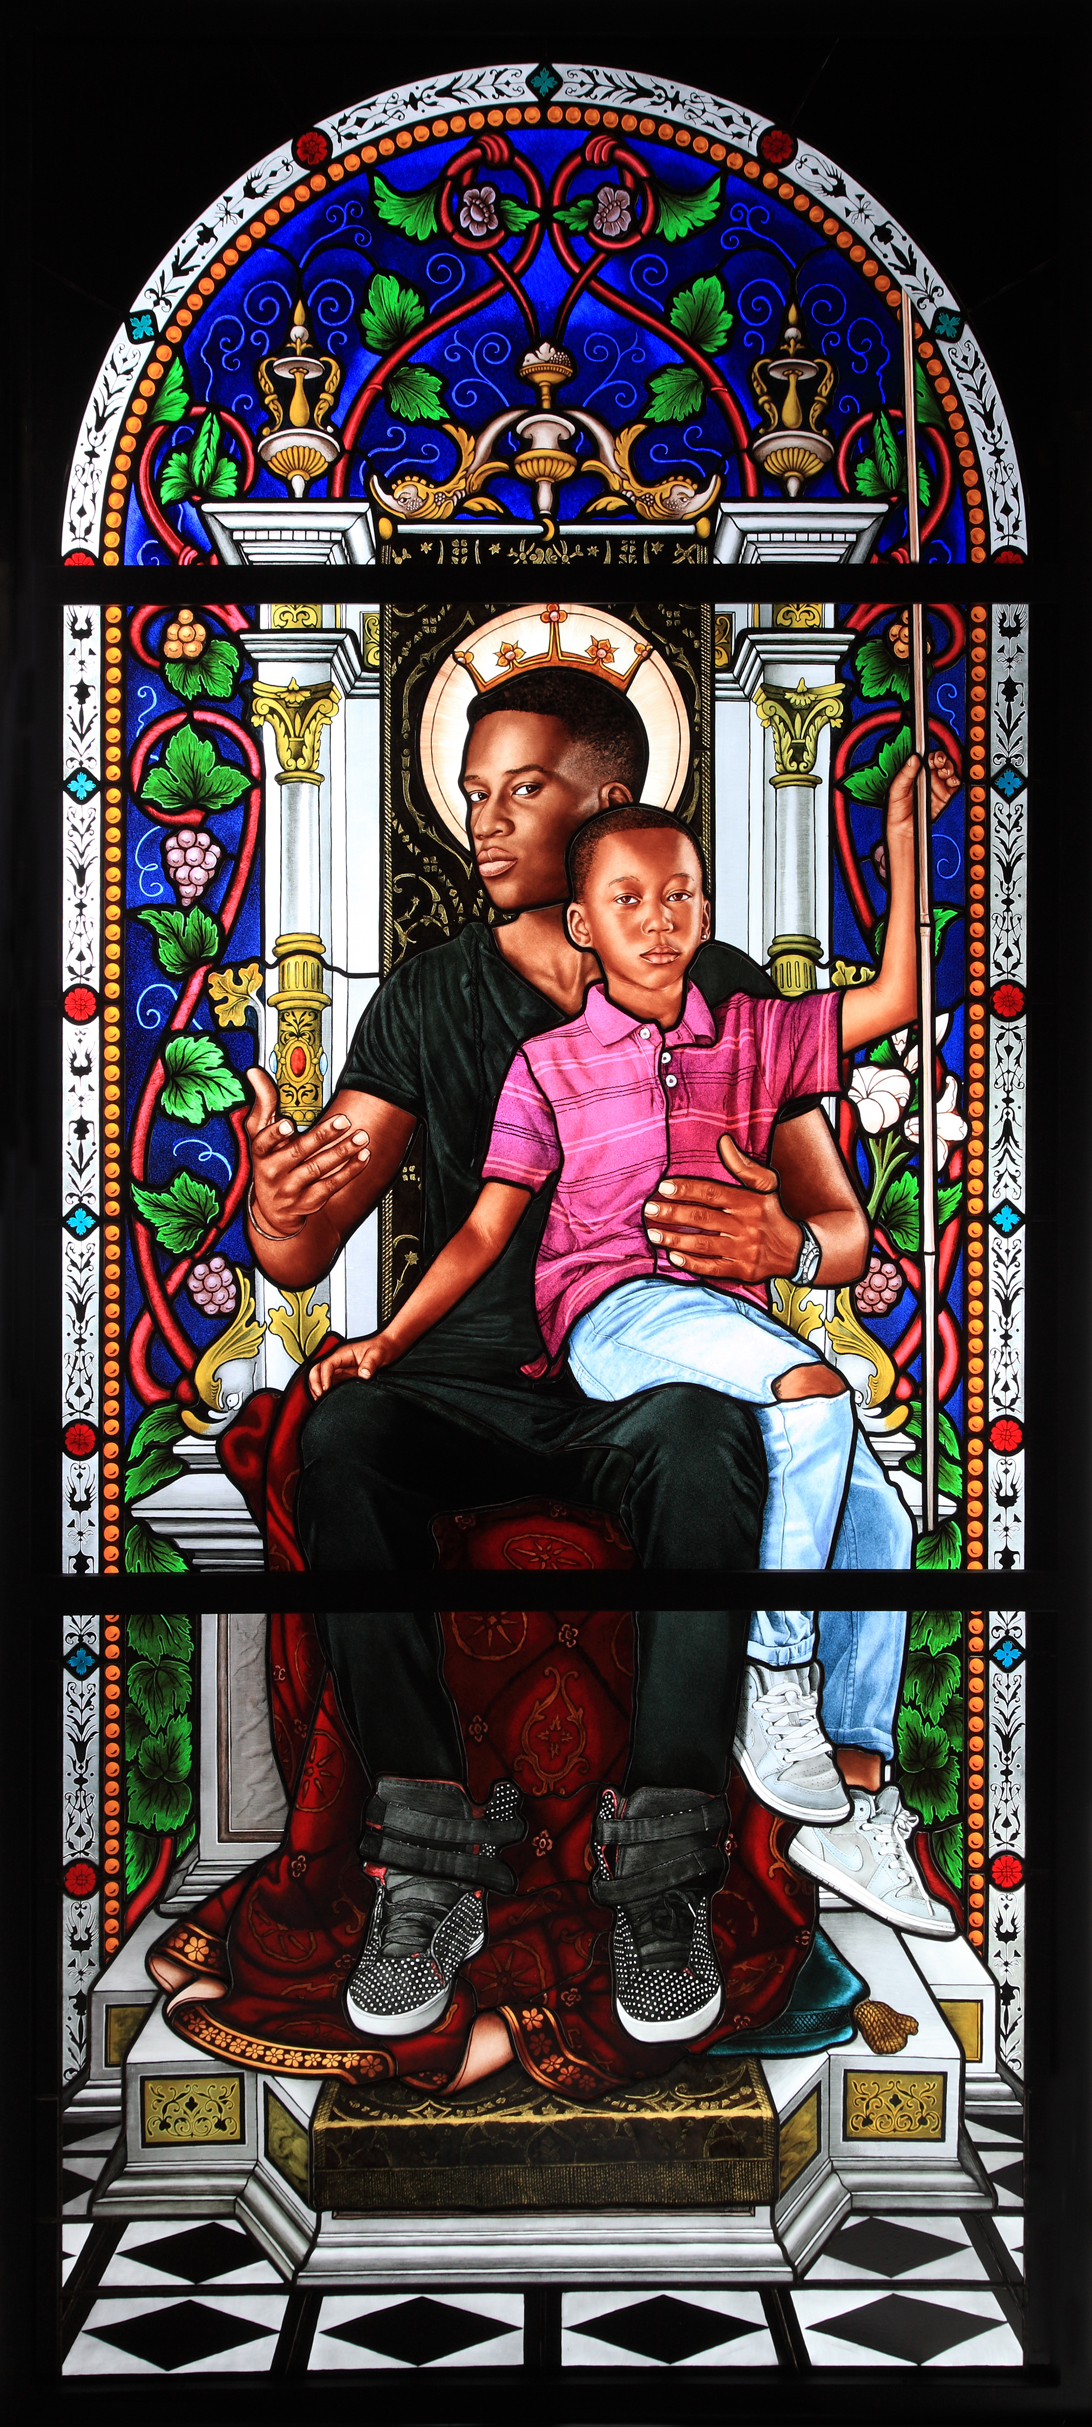 Kehinde Wiley | Lamentation, Le Petit Palais, Paris, France, October 20, 2016 - January 15, 2017 | The Virgin and Child Enthroned, 2016 Stained Glass in an Aluminum Frame. | 8